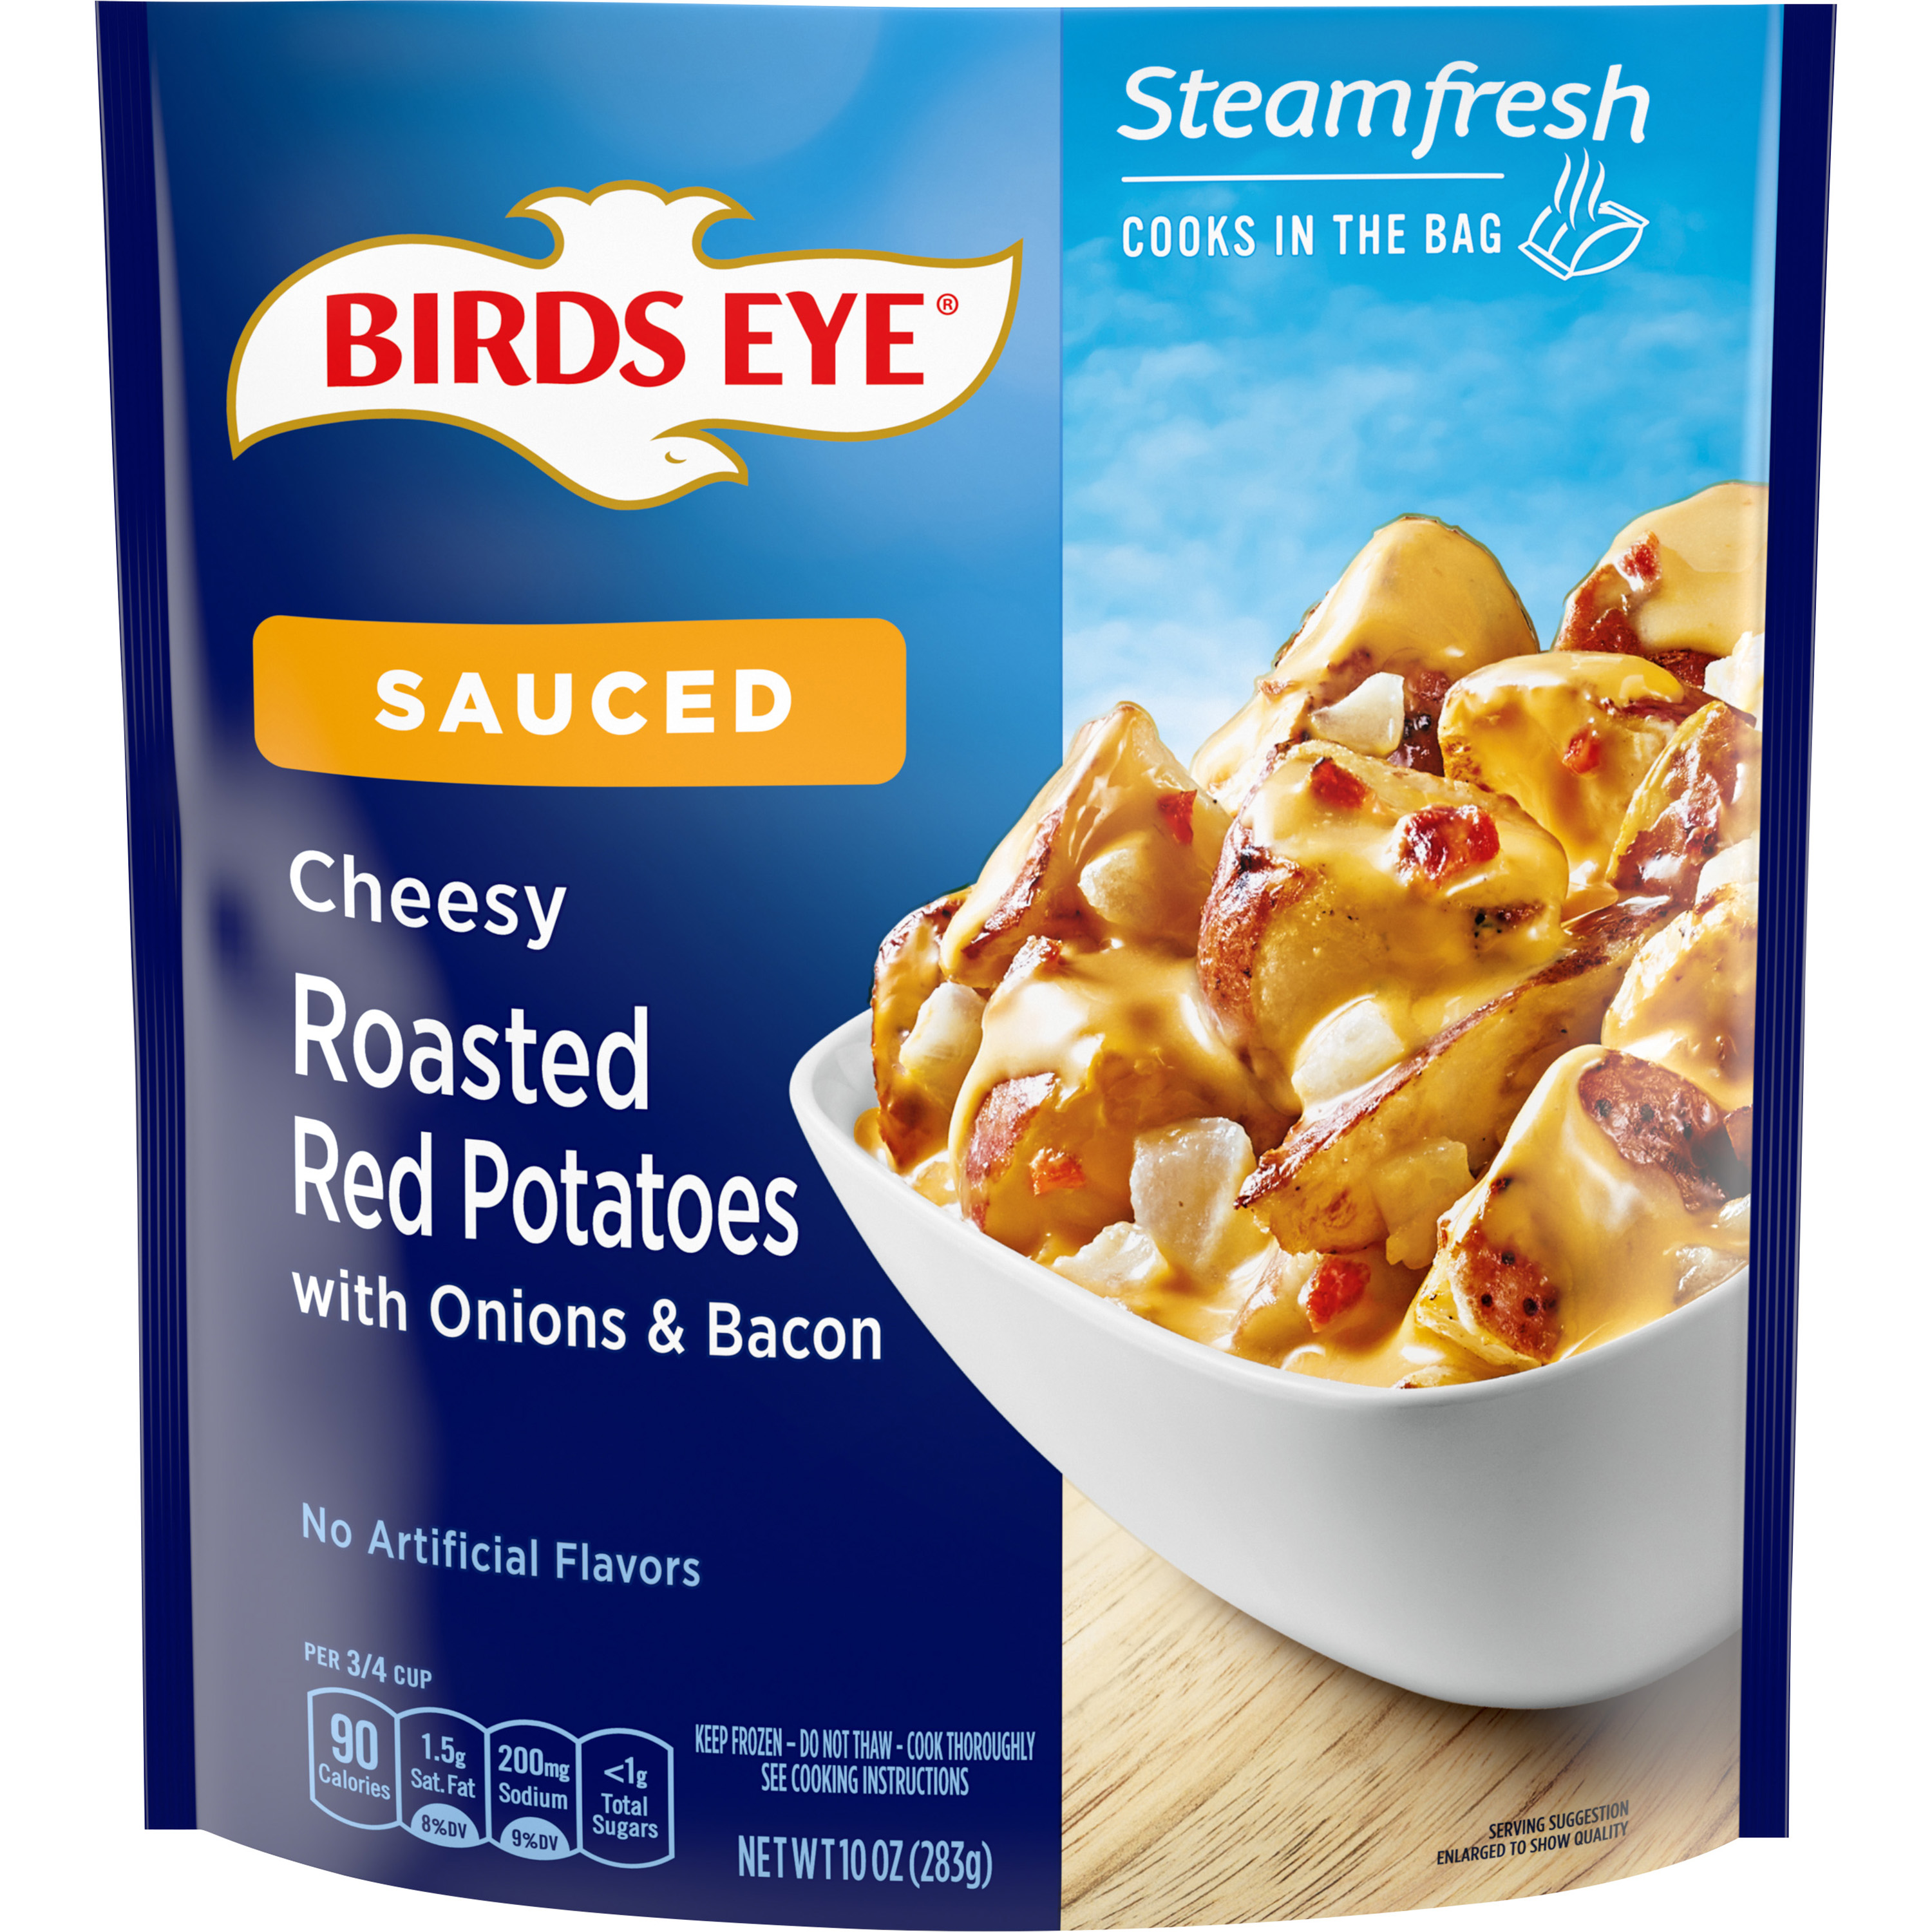 Birds Eye Steamfresh Chef’s Favorites Lightly Sauced Roasted Potatoes with Onions & Bacon in a Cheese Sauce